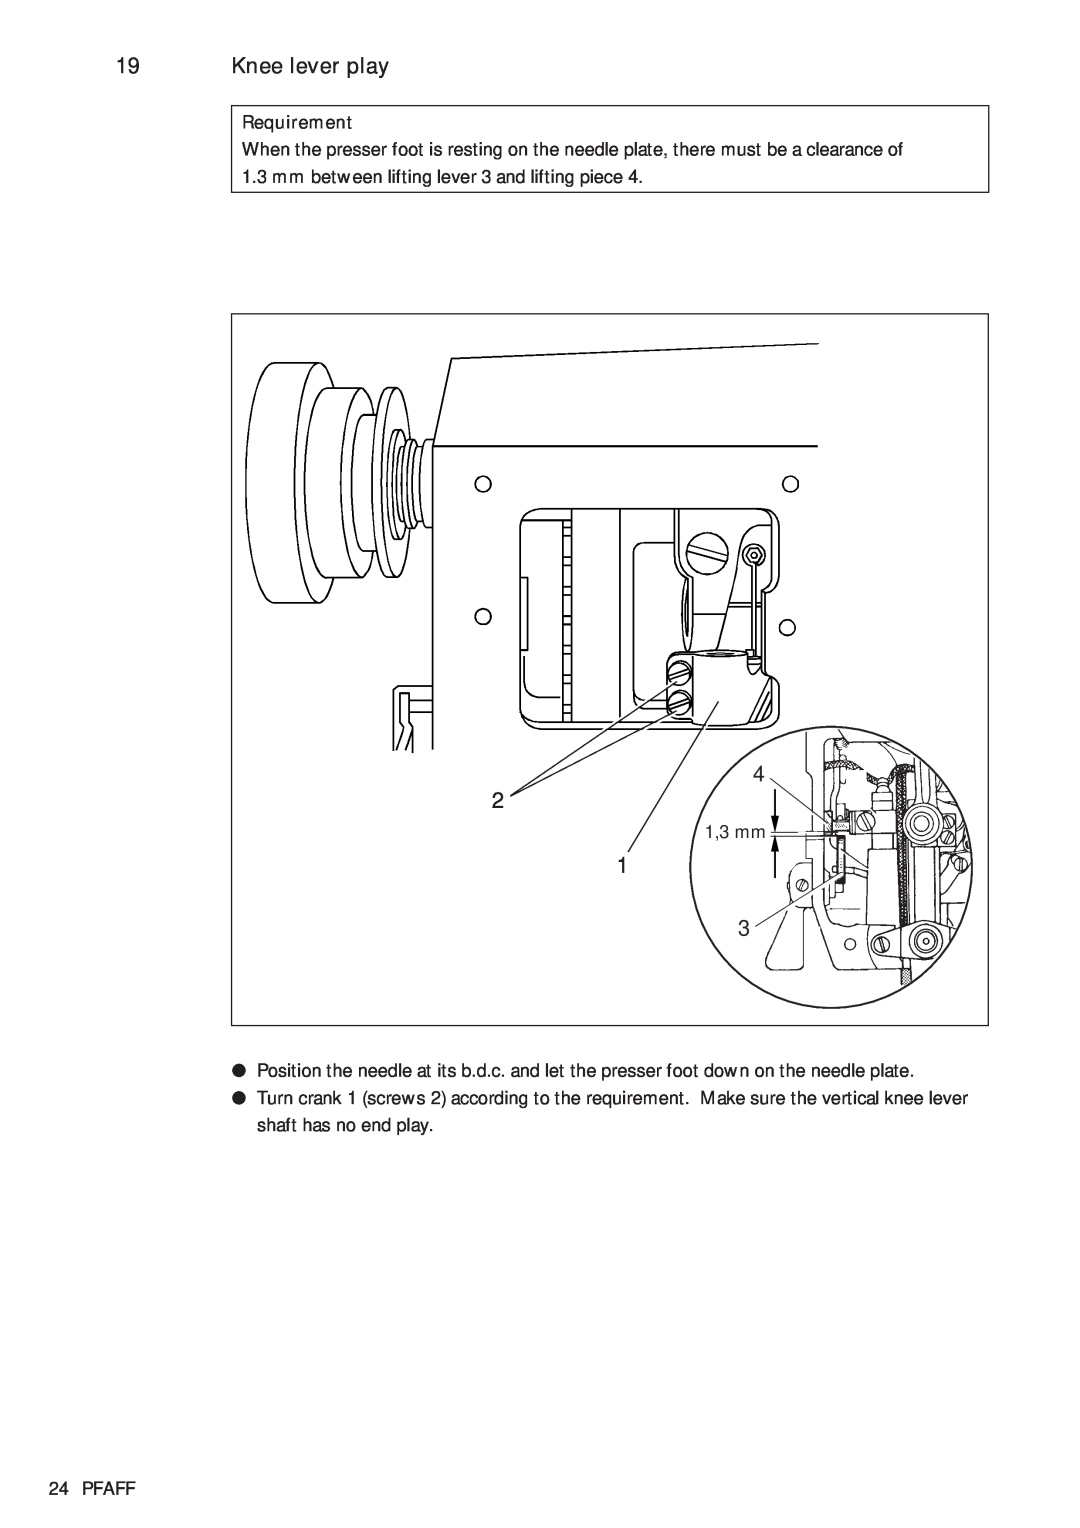 Pfaff 481, 483 service manual Knee lever play, Requirement, mm between lifting lever 3 and lifting piece, 1,3 mm, Pfaff 